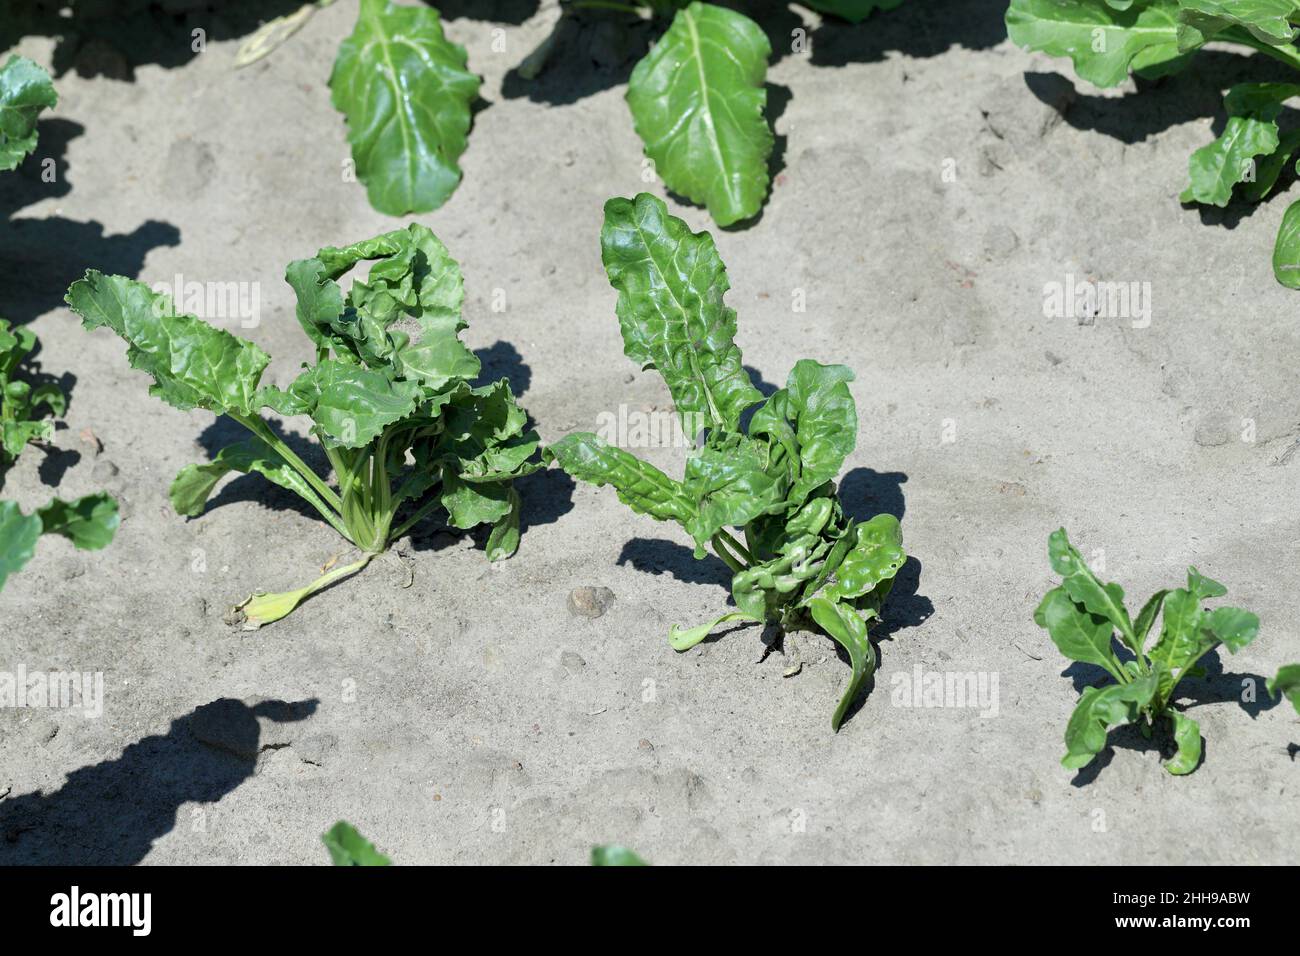 Beet plants damaged by crop protection products - phytotoxicity, deformed plants. Stock Photo